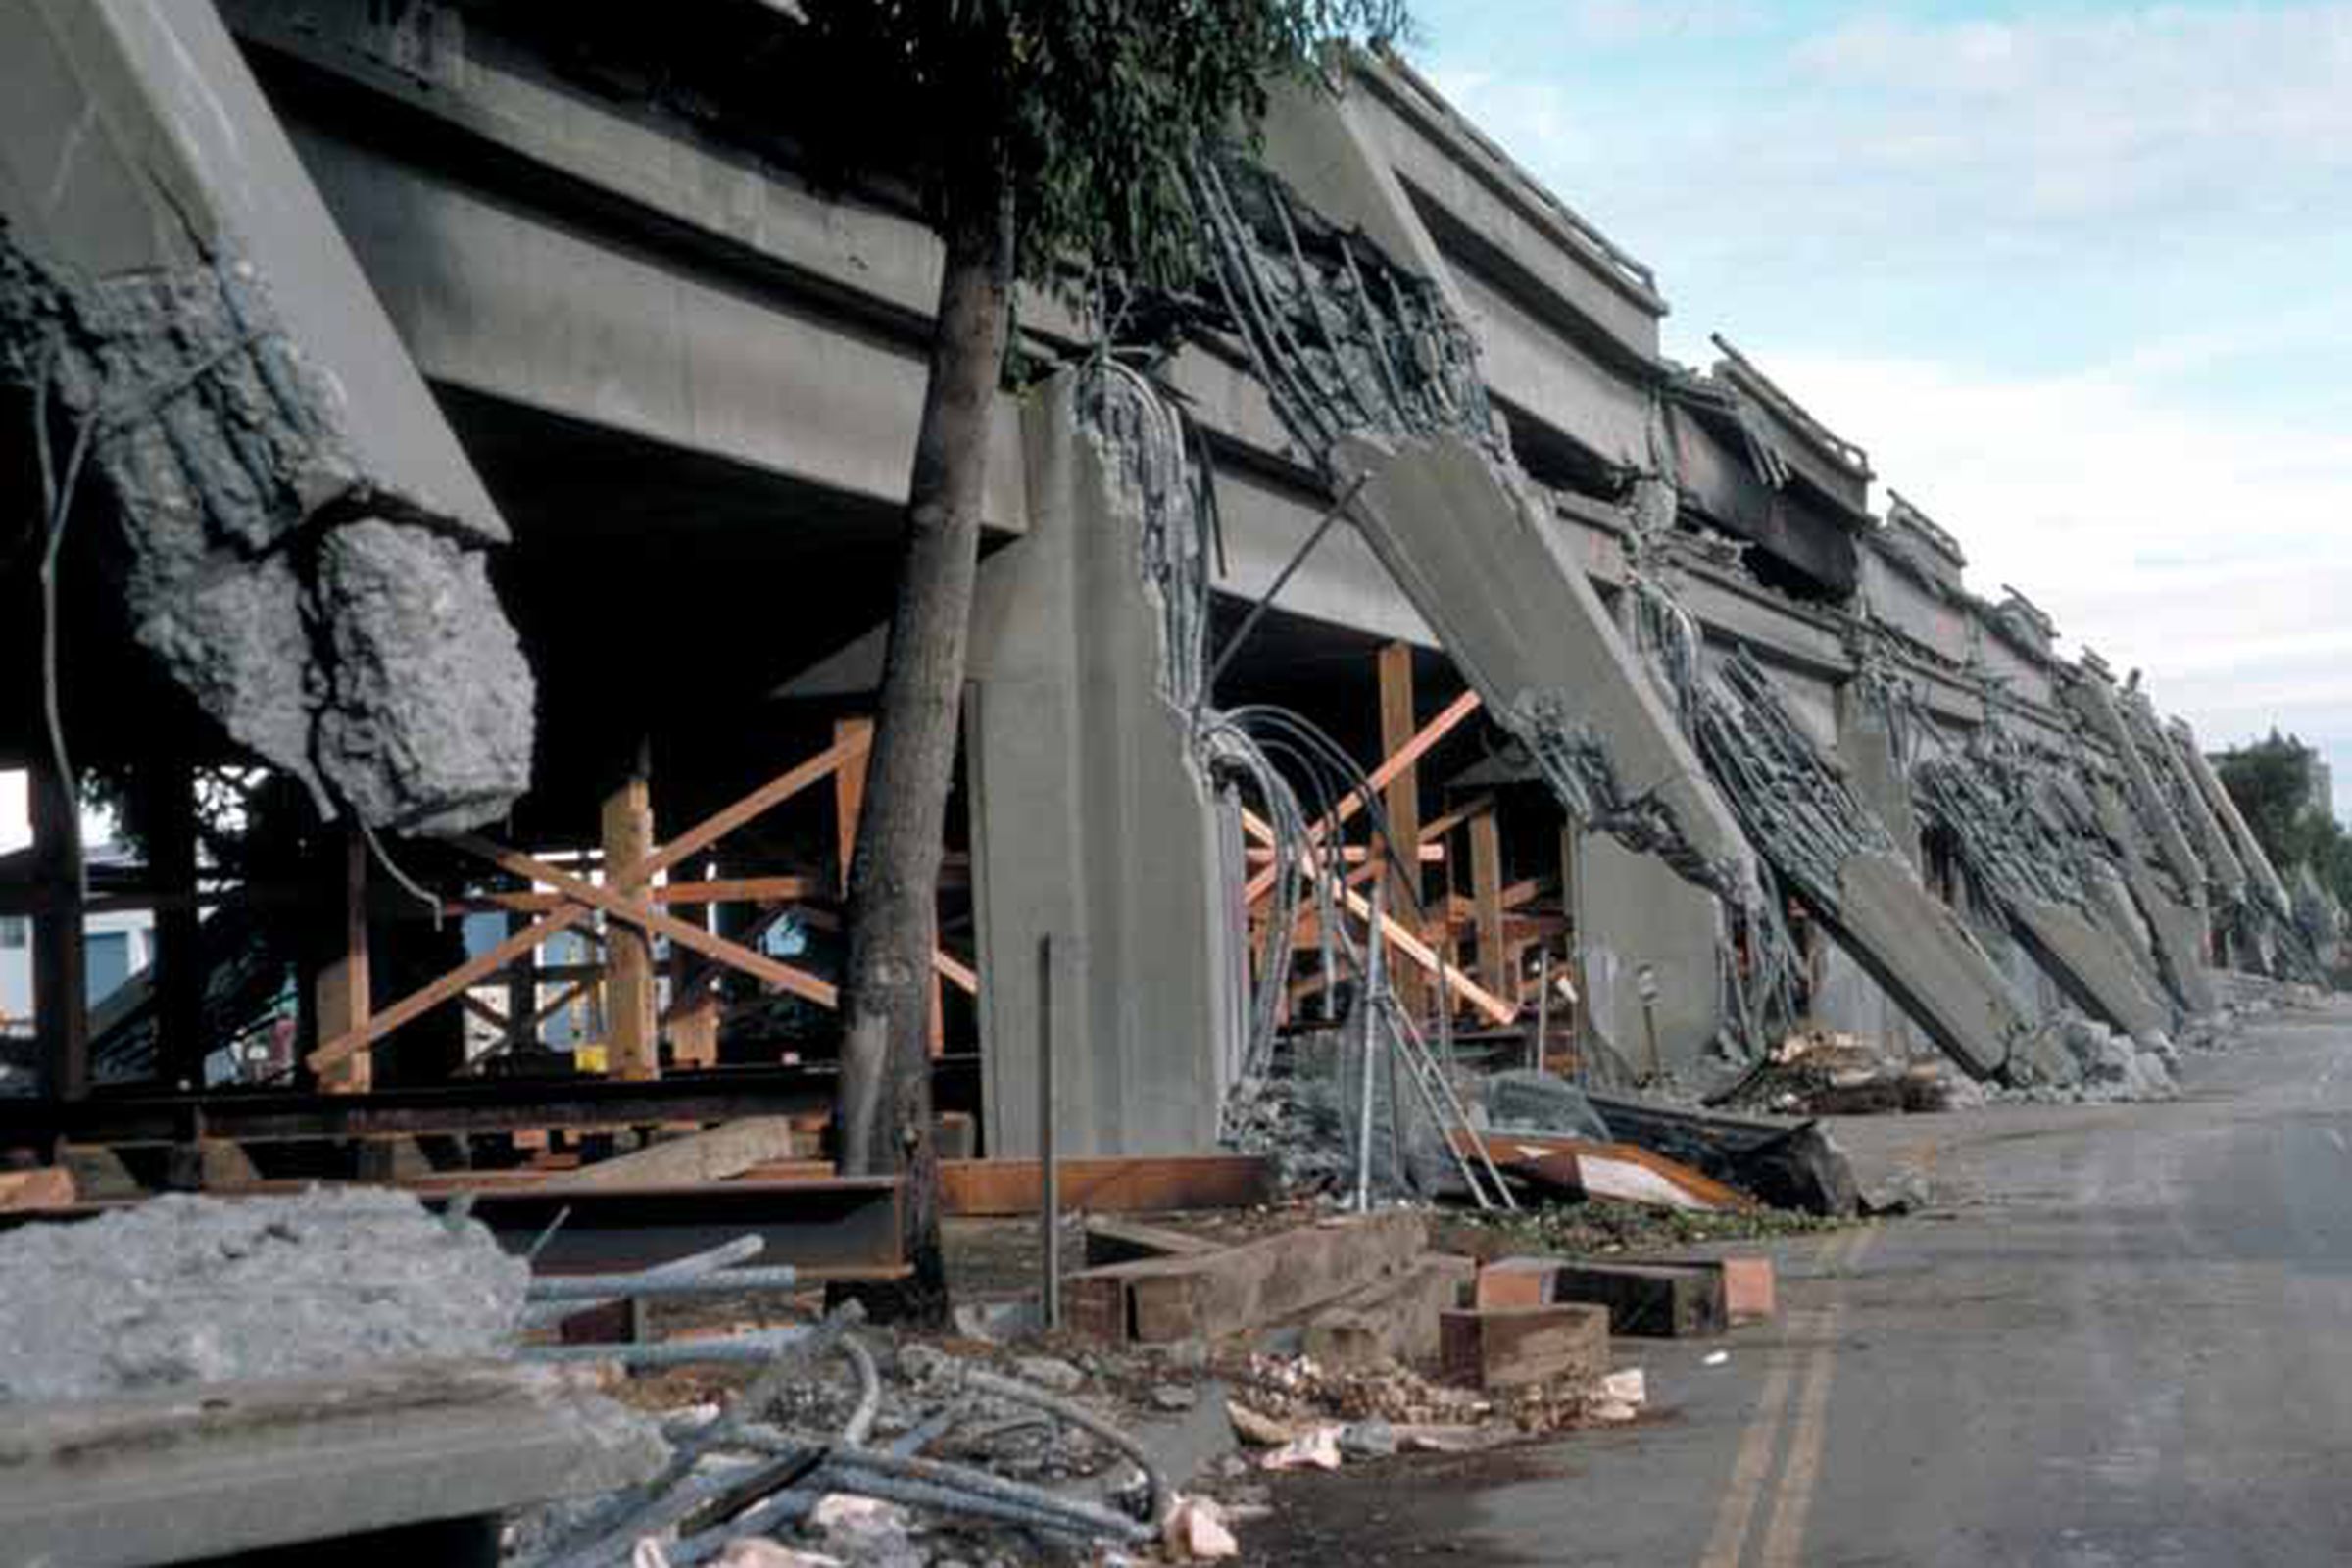 The Cypress viaduct in West Oakland collapsed in the 1989 Loma Prieta quake